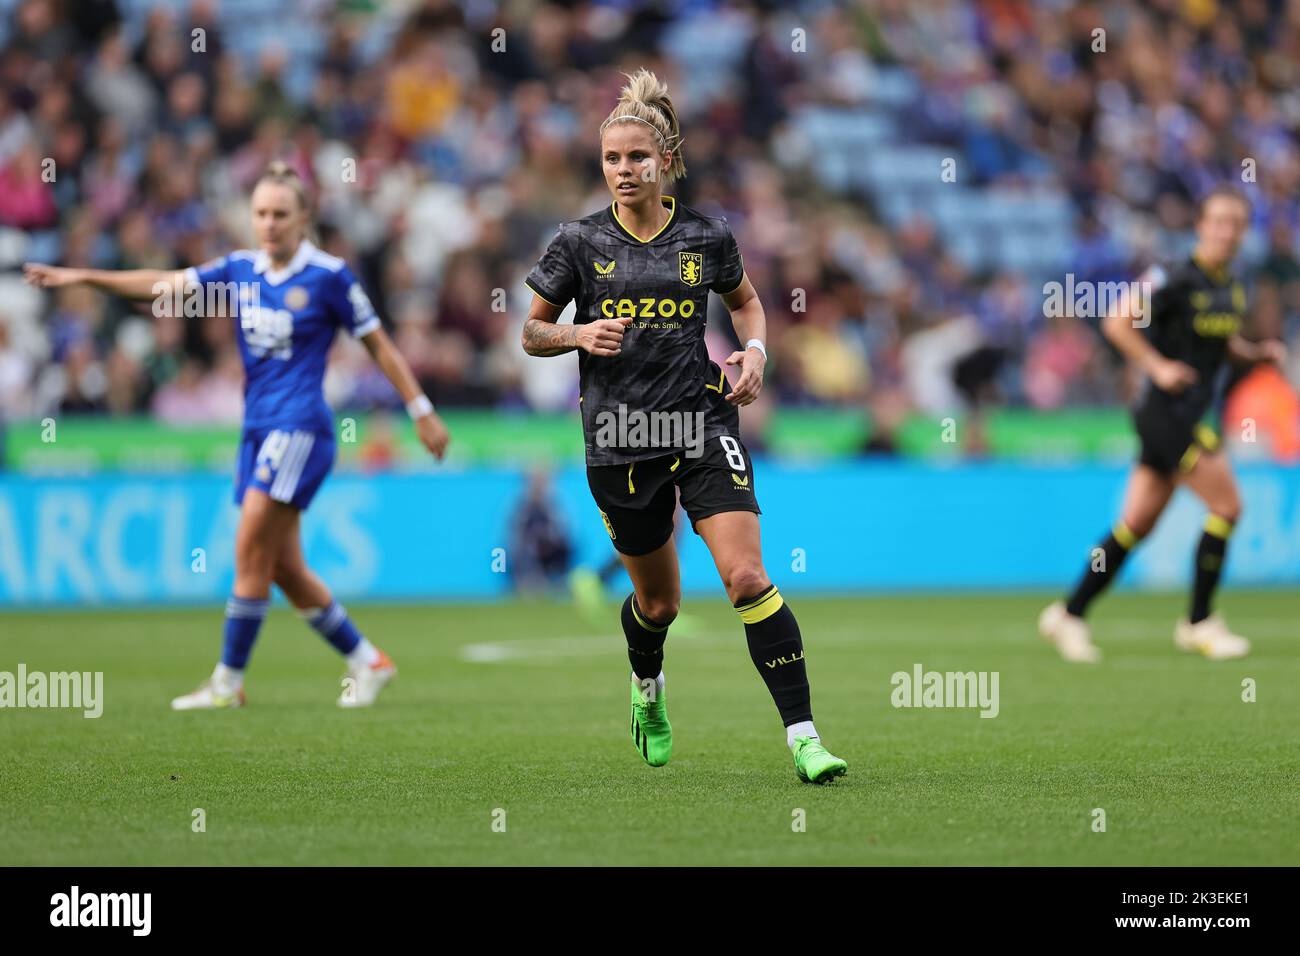 Leicester, UK. 25th Sep, 2022. Leicester, England, September 25th 2022: Rachel Daly (8 Aston Villa) during the Barclays FA Womens Super League game between Leicester City and Aston Villa at the King Power Stadium in Leicester, England. (James Holyoak/SPP) Credit: SPP Sport Press Photo. /Alamy Live News Stock Photo